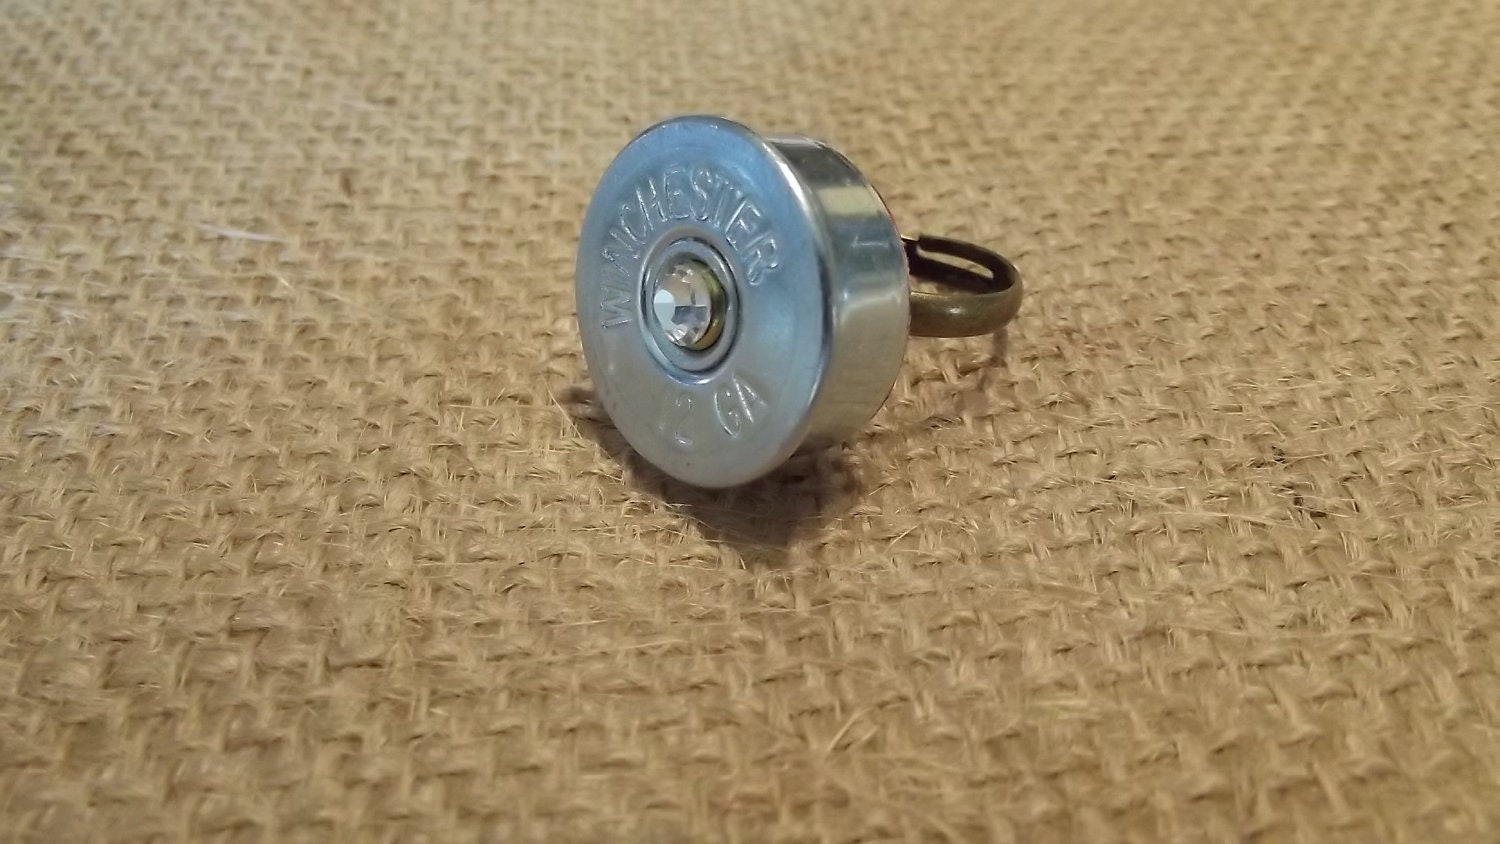 Recycled 12G Winchester Shotgun Shell Redneck Hunting Jewelry Adjustable Ring with Rhinestone Bridesmaid gift